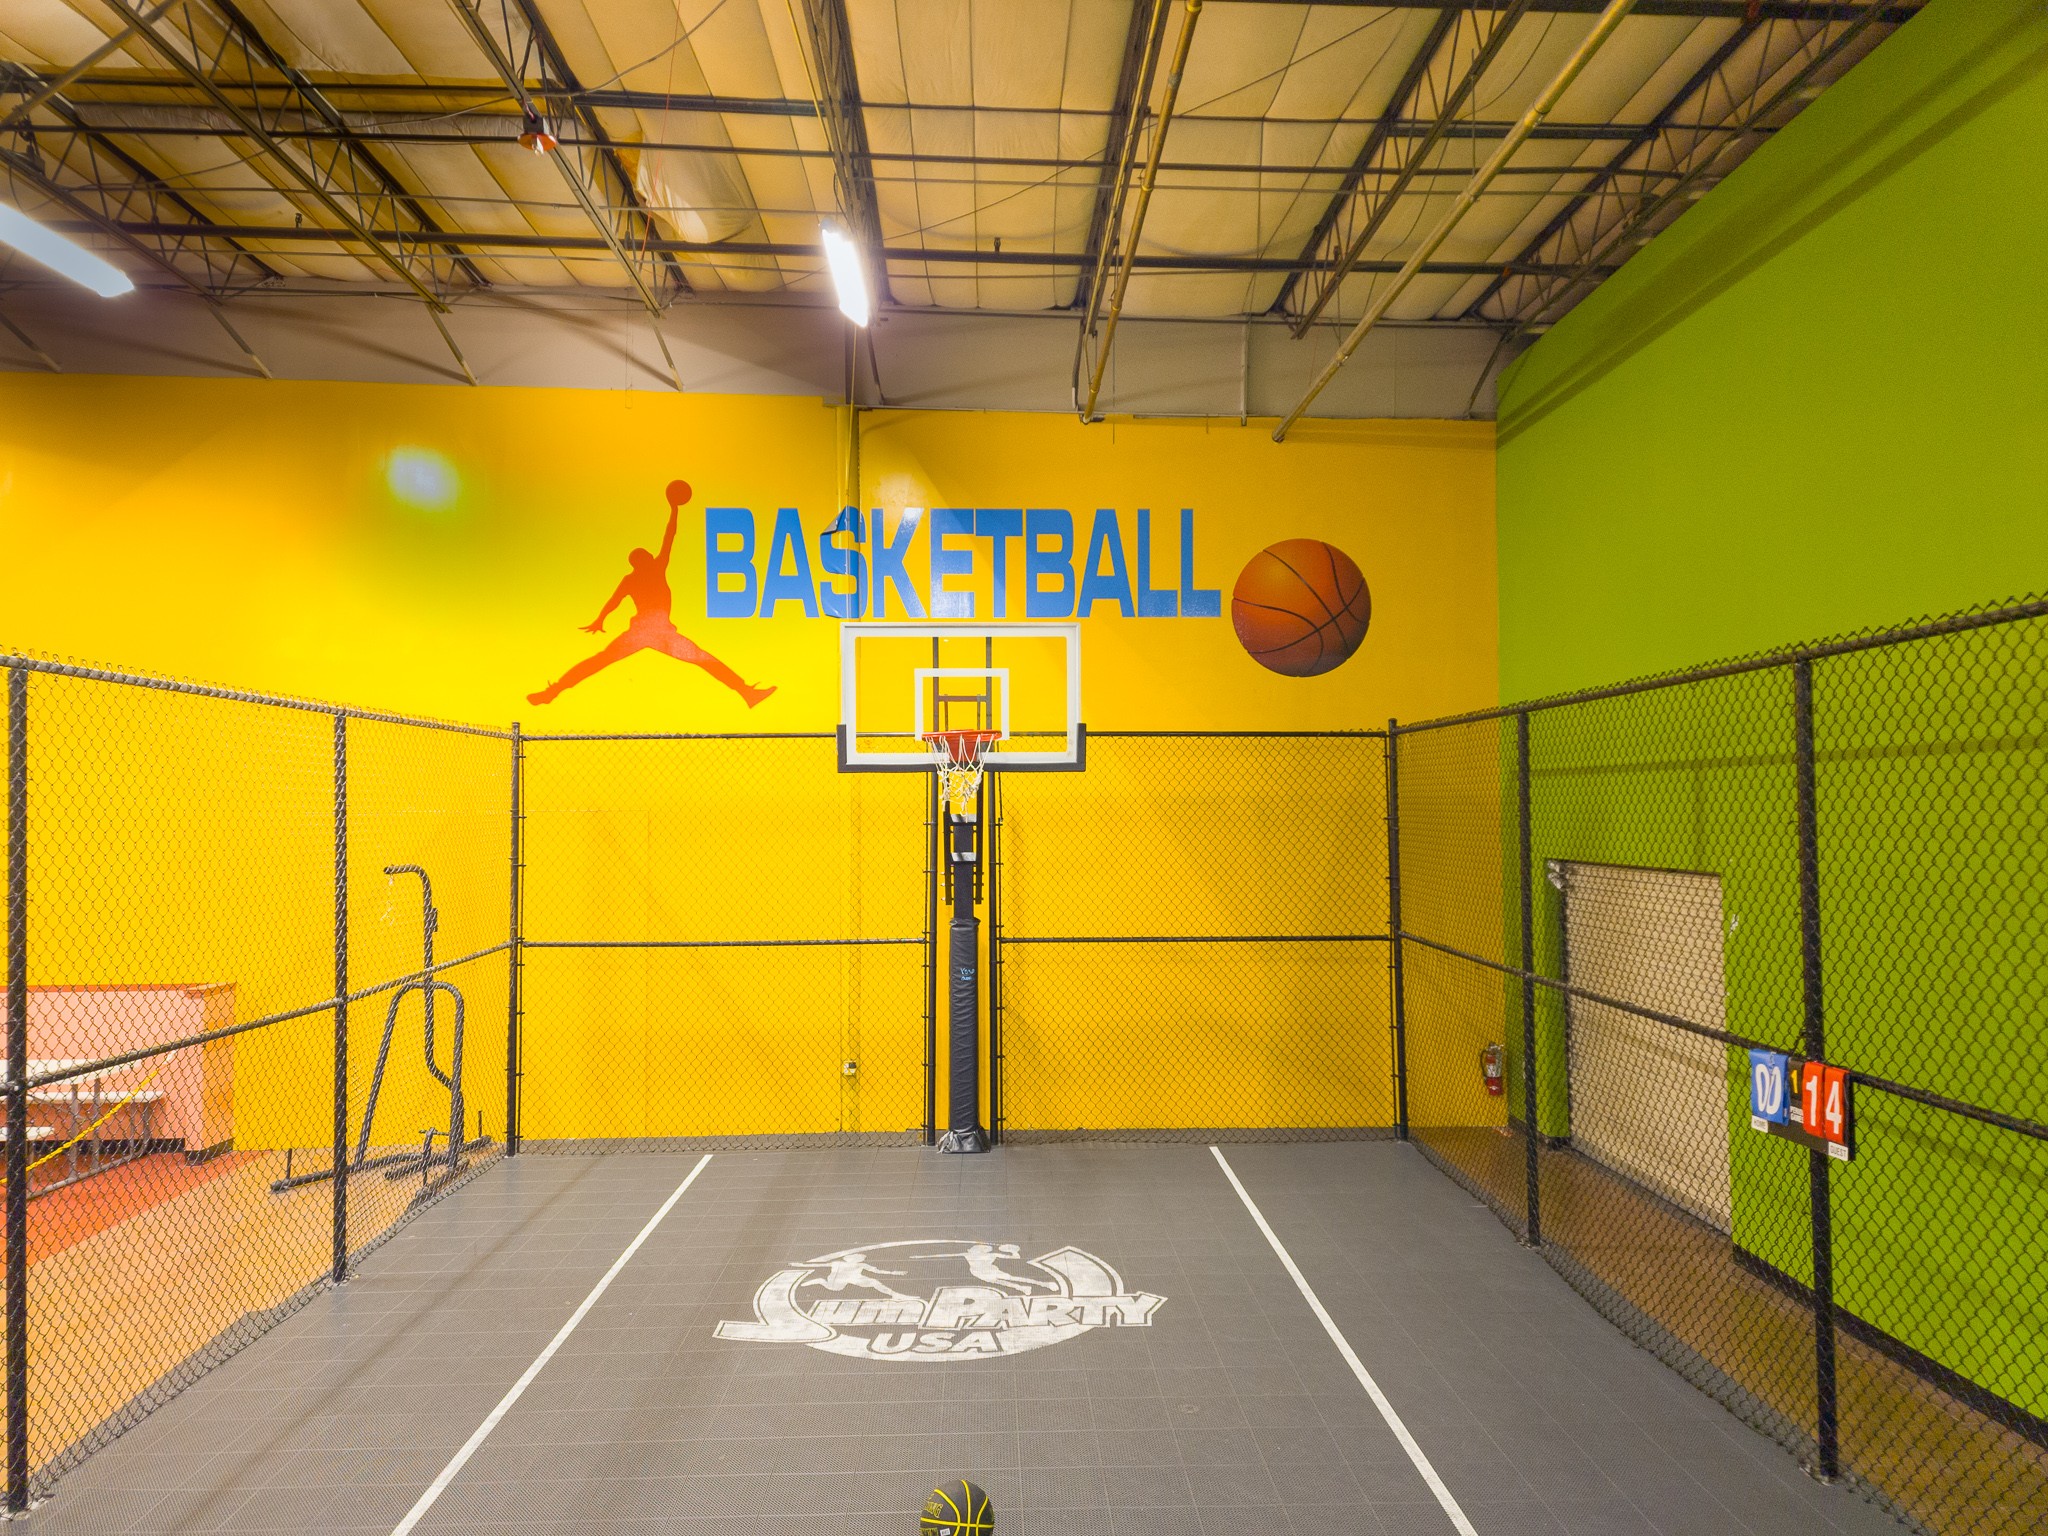 Play basketball with friends at Jump Party USA's Indoor Basketball court with basketball.